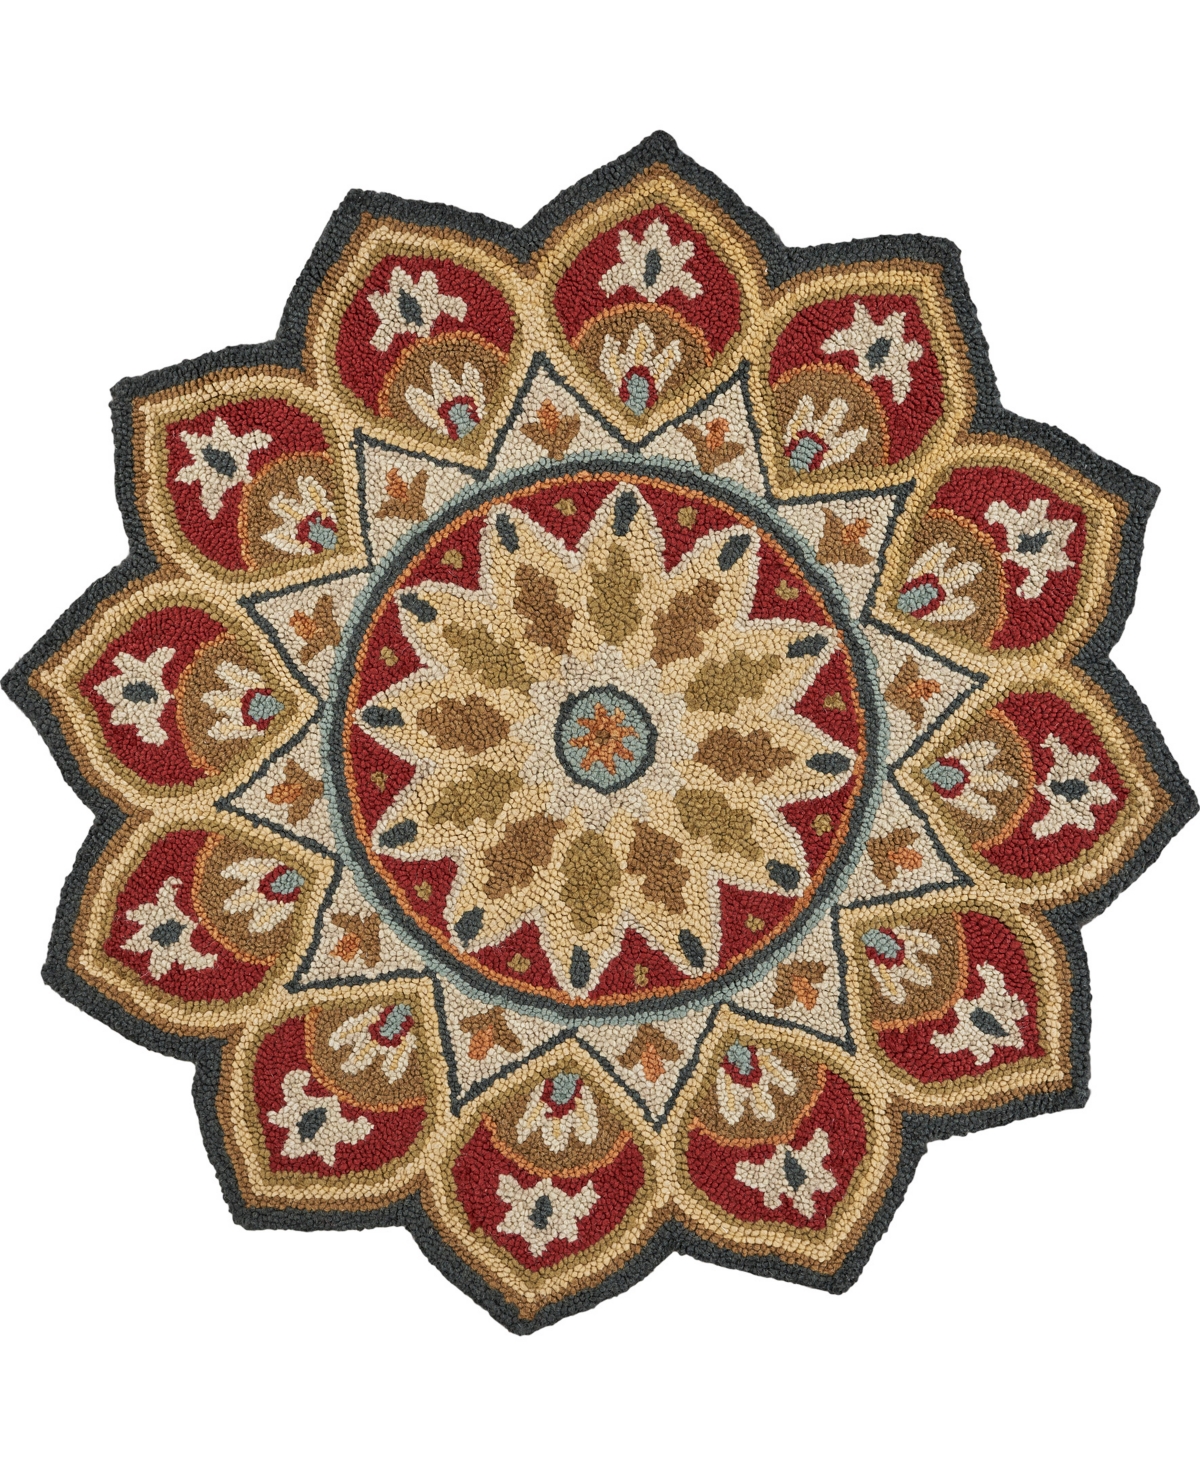 Lr Home Sweet Sinuo54103 6' X 6' Round Area Rug In Red